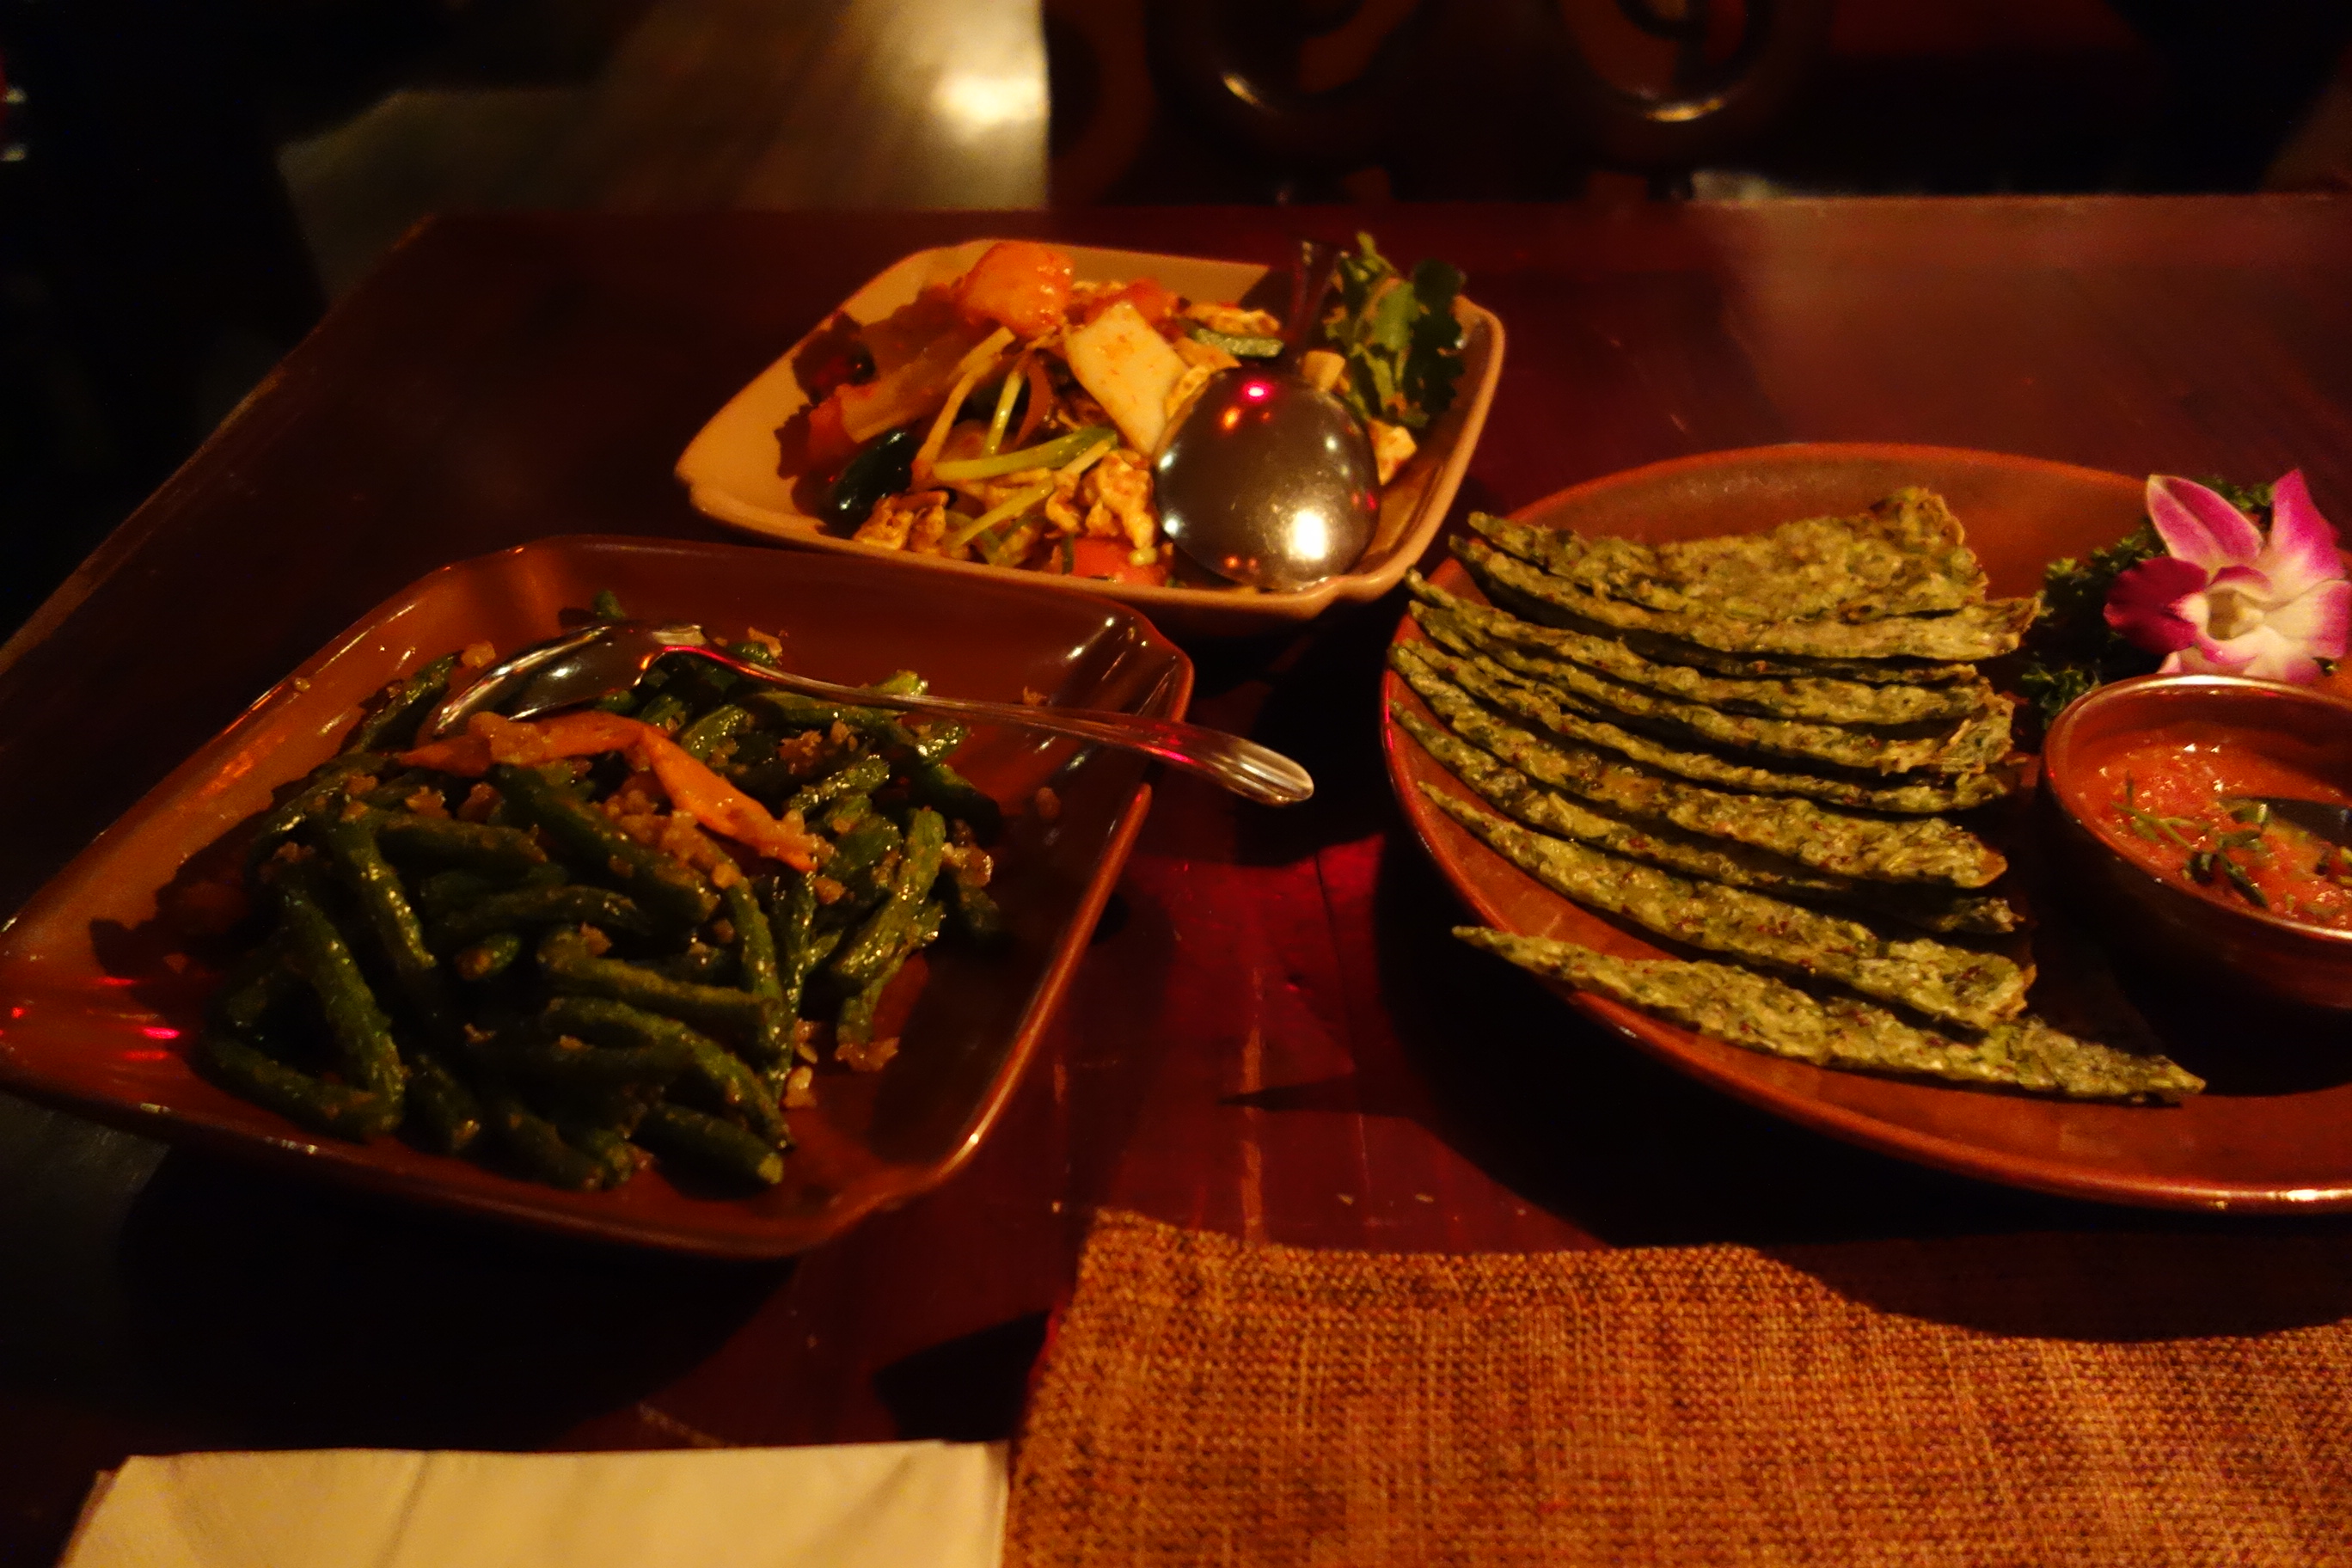 Green beans, Yunnan rice cakes, and Yunnan vegetable cakes. All pretty meh.